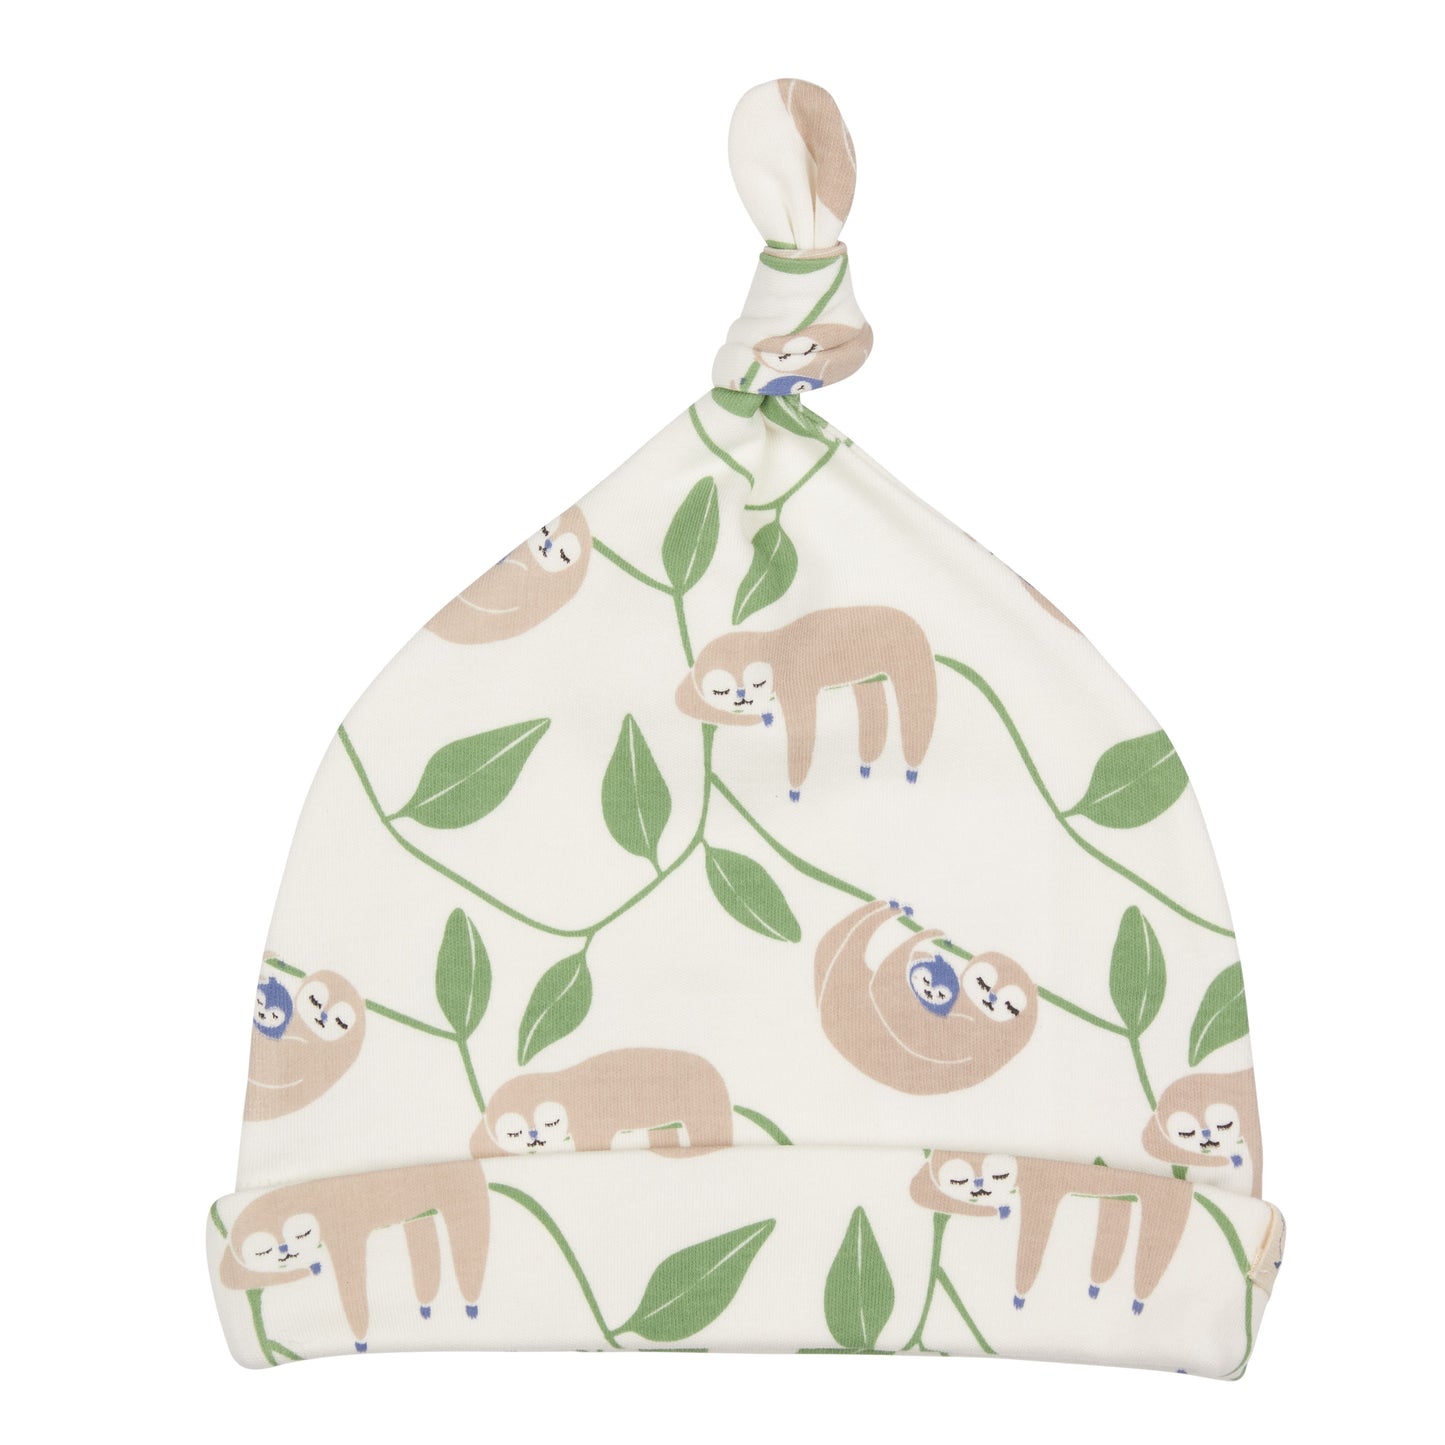 Eco Friendly Neutral New Baby Gift Hamper - Sloths Abound, Organic Cotton Baby Sleepsuit, Sloth Baby Toy